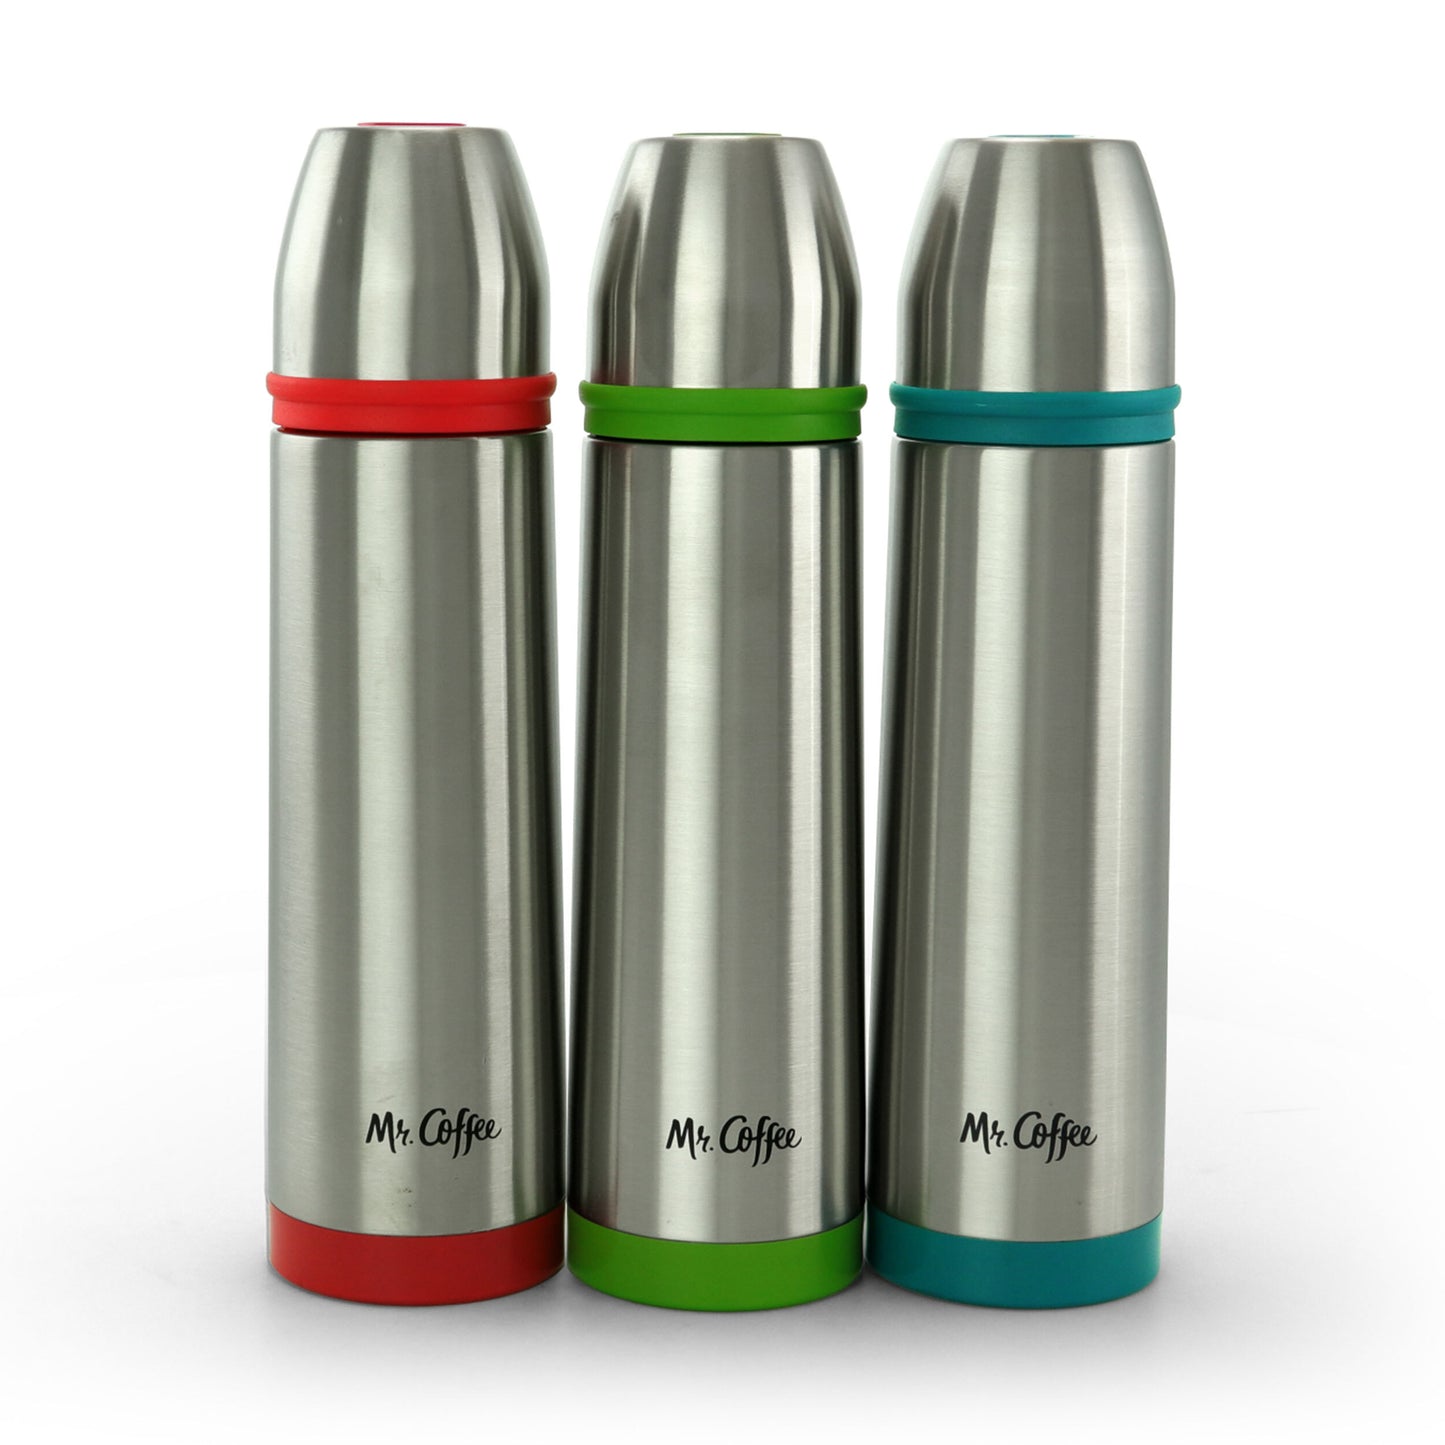 Mr. Coffee Altona 3 Piece 15 Ounce Stainless Steel Thermal Travel Bottles in Assorted Colors